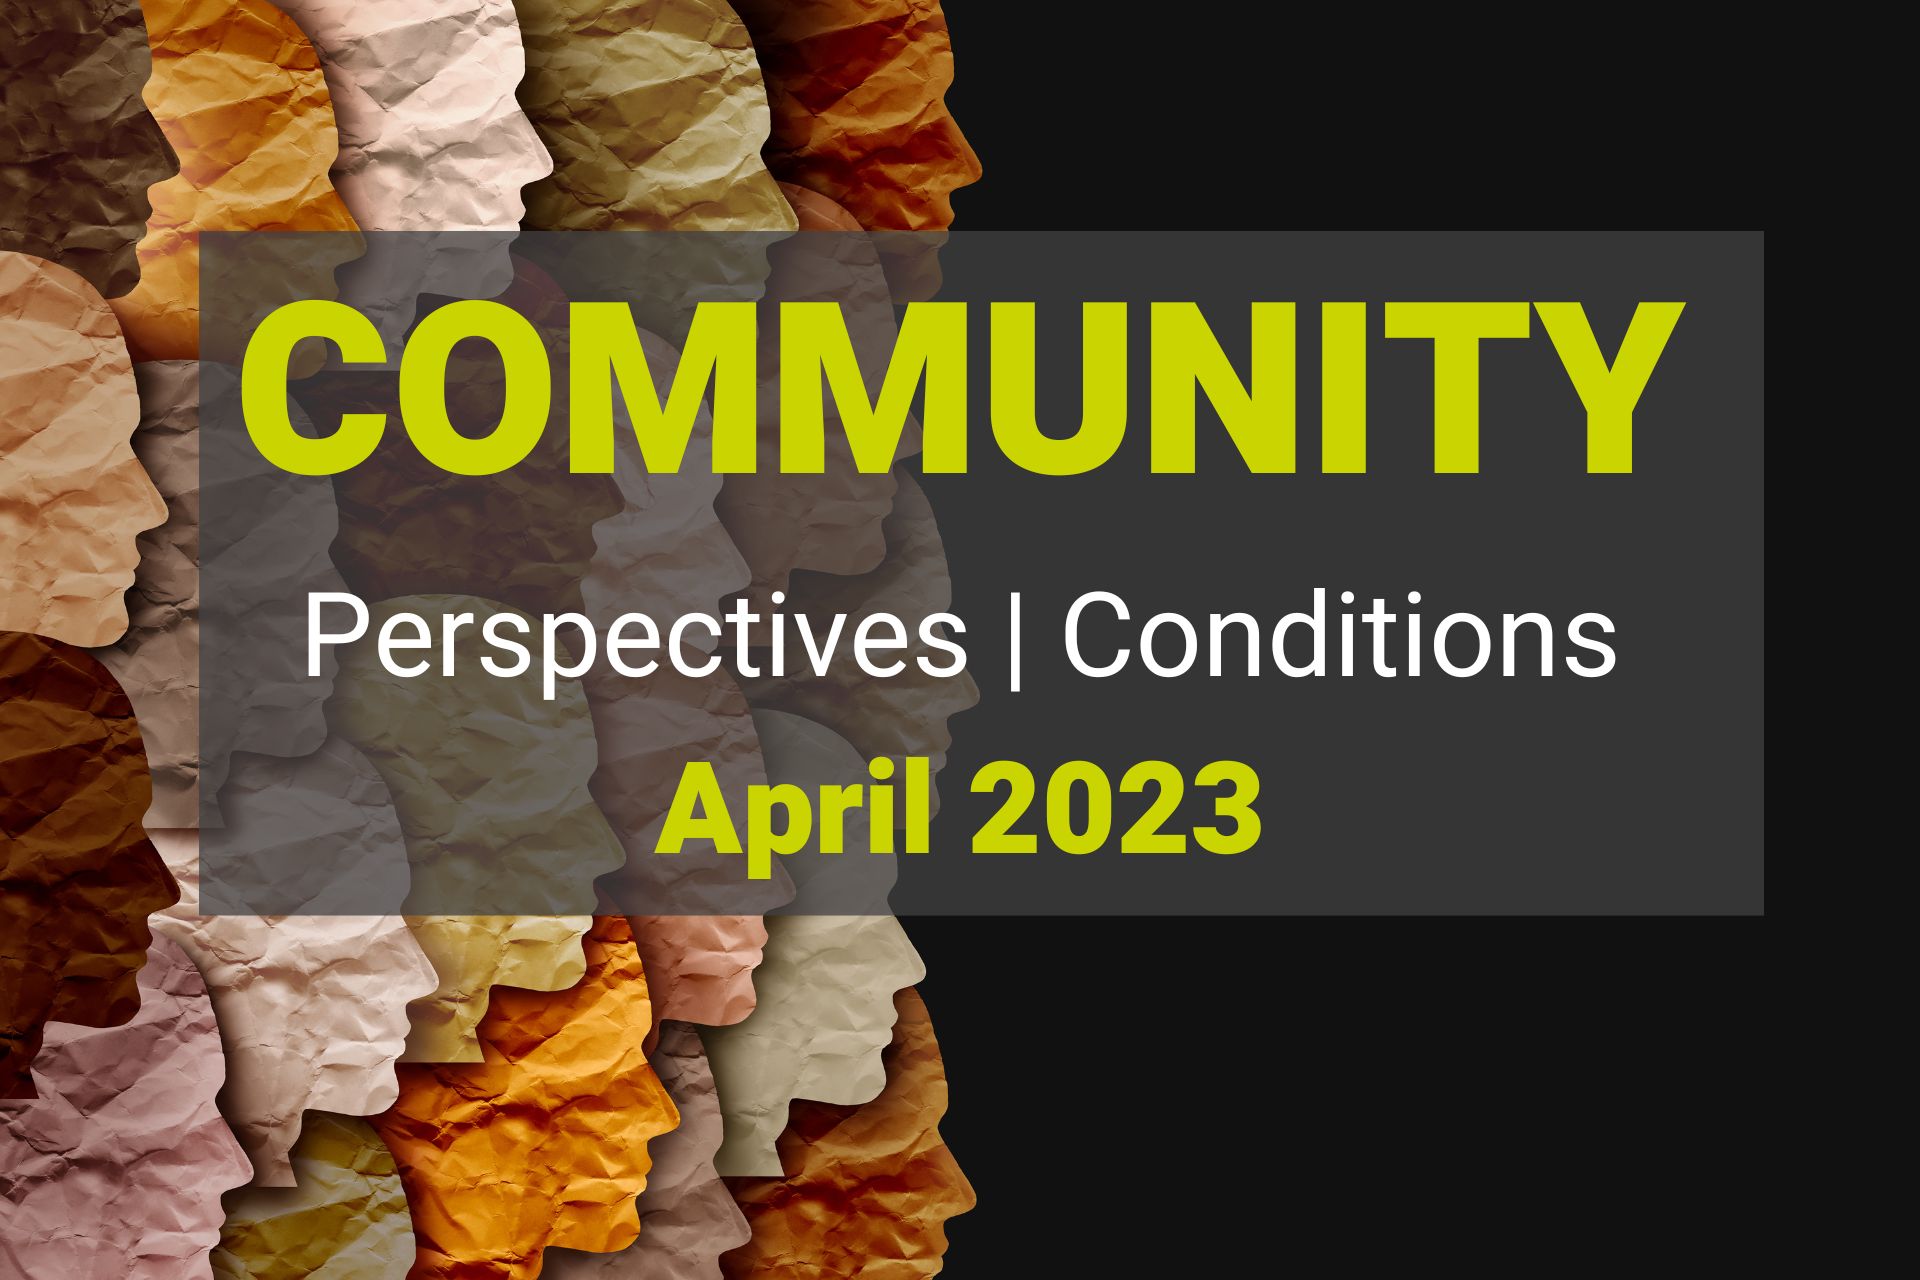 Community Perspectives and Conditions April 2023